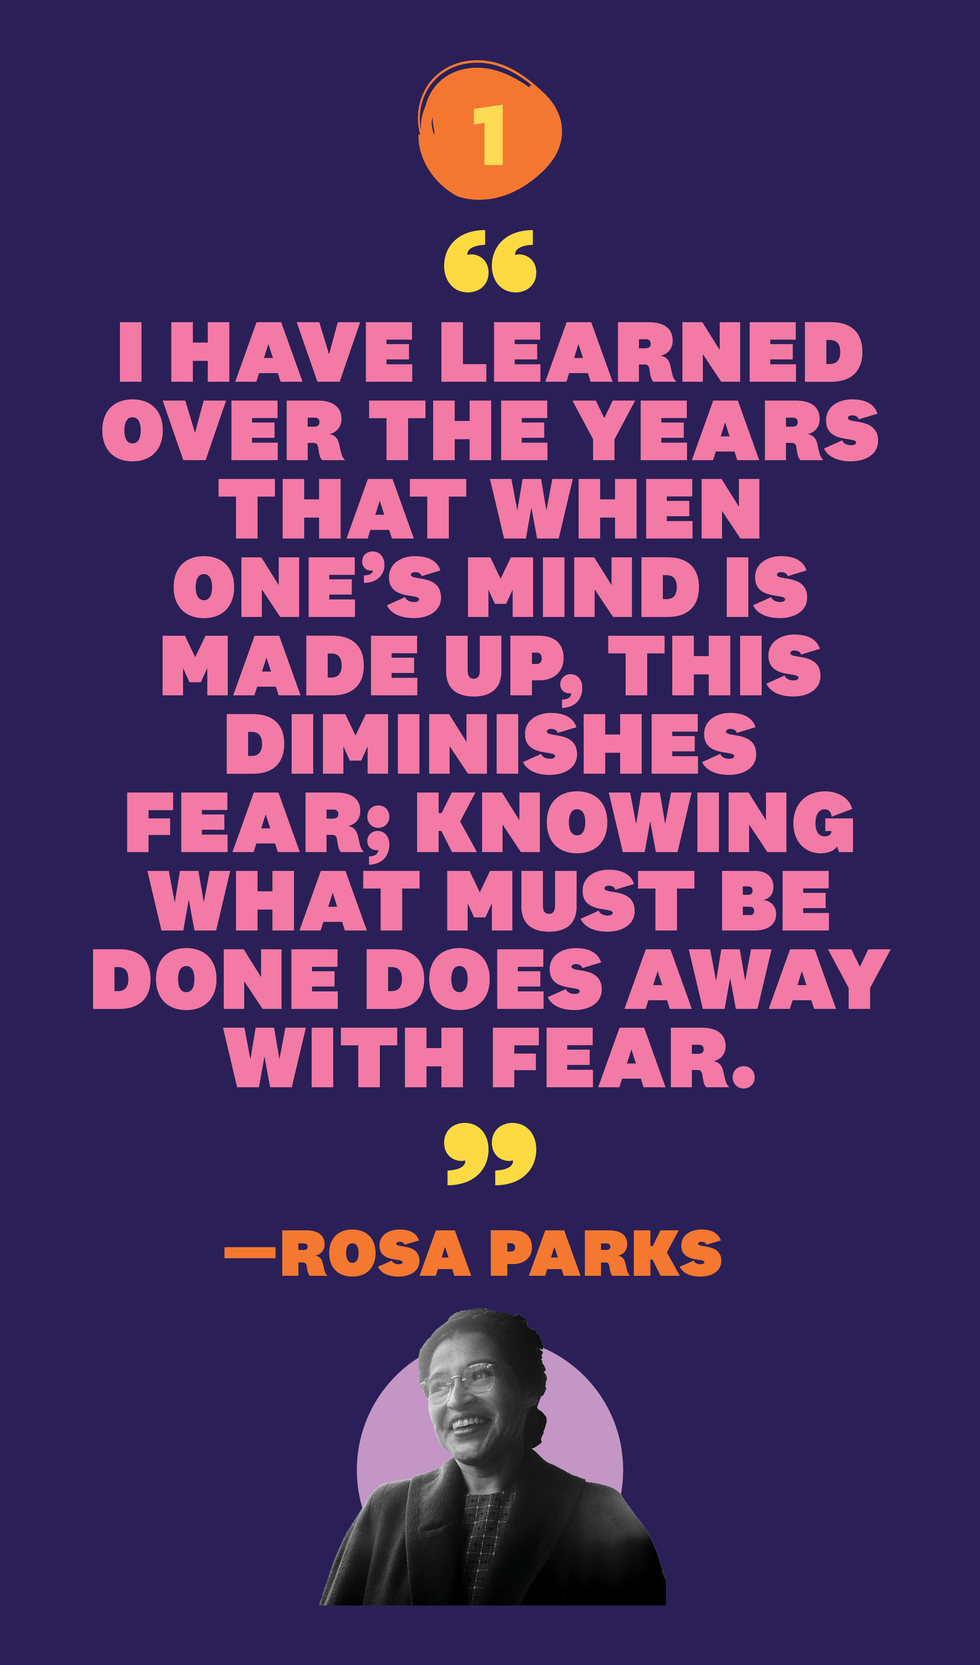 i have learned over the years that when one’s mind is made up, this diminishes fear knowing what must be done does away with fear —rosa parks